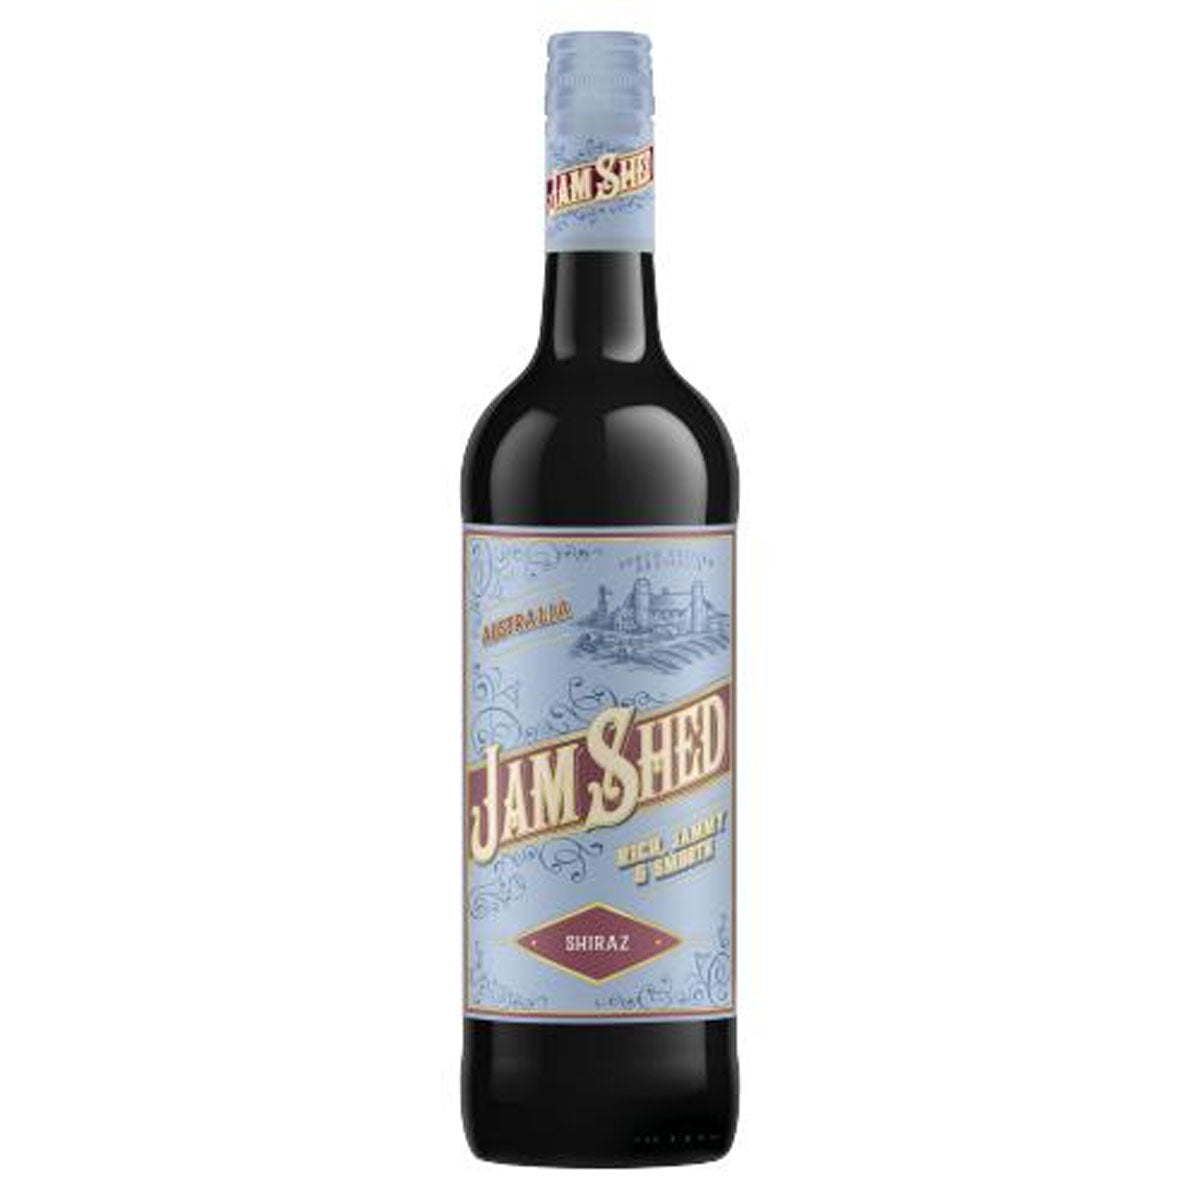 Jam Shed - Shiraz (13.5% ABV) - 750ml red wine.